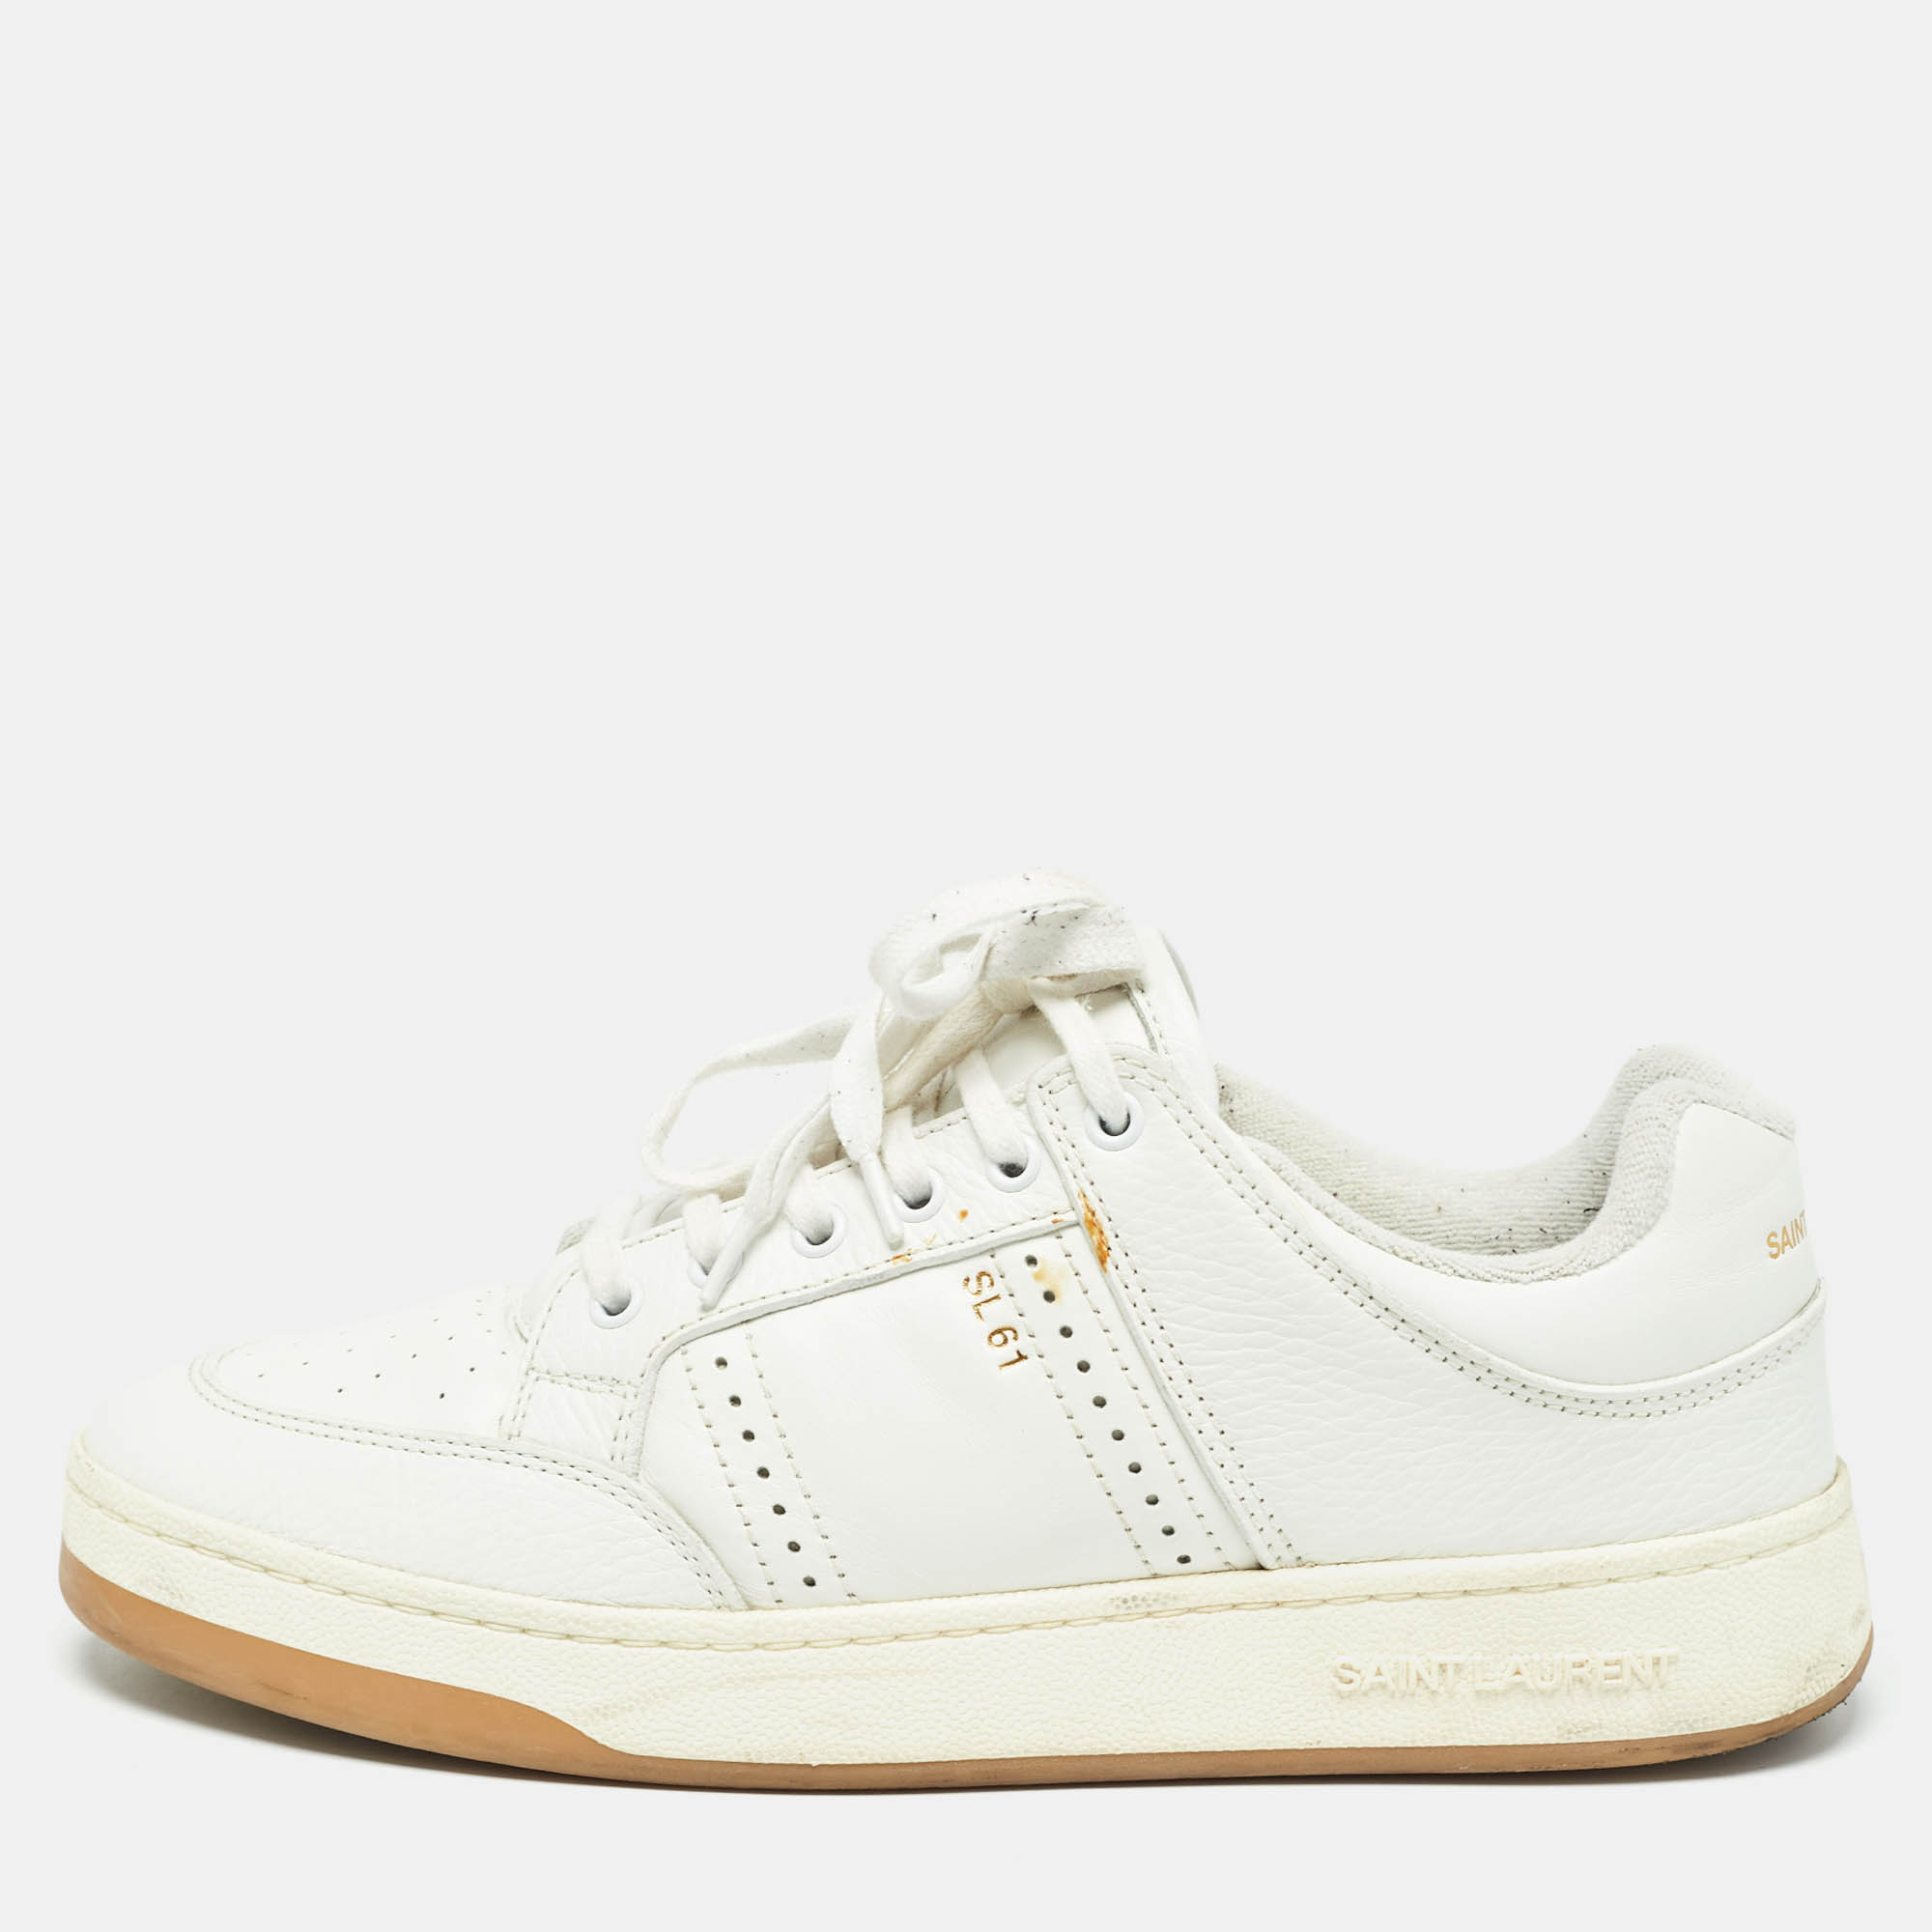 

Saint Laurent White Leather SL/61 Sneakers Size